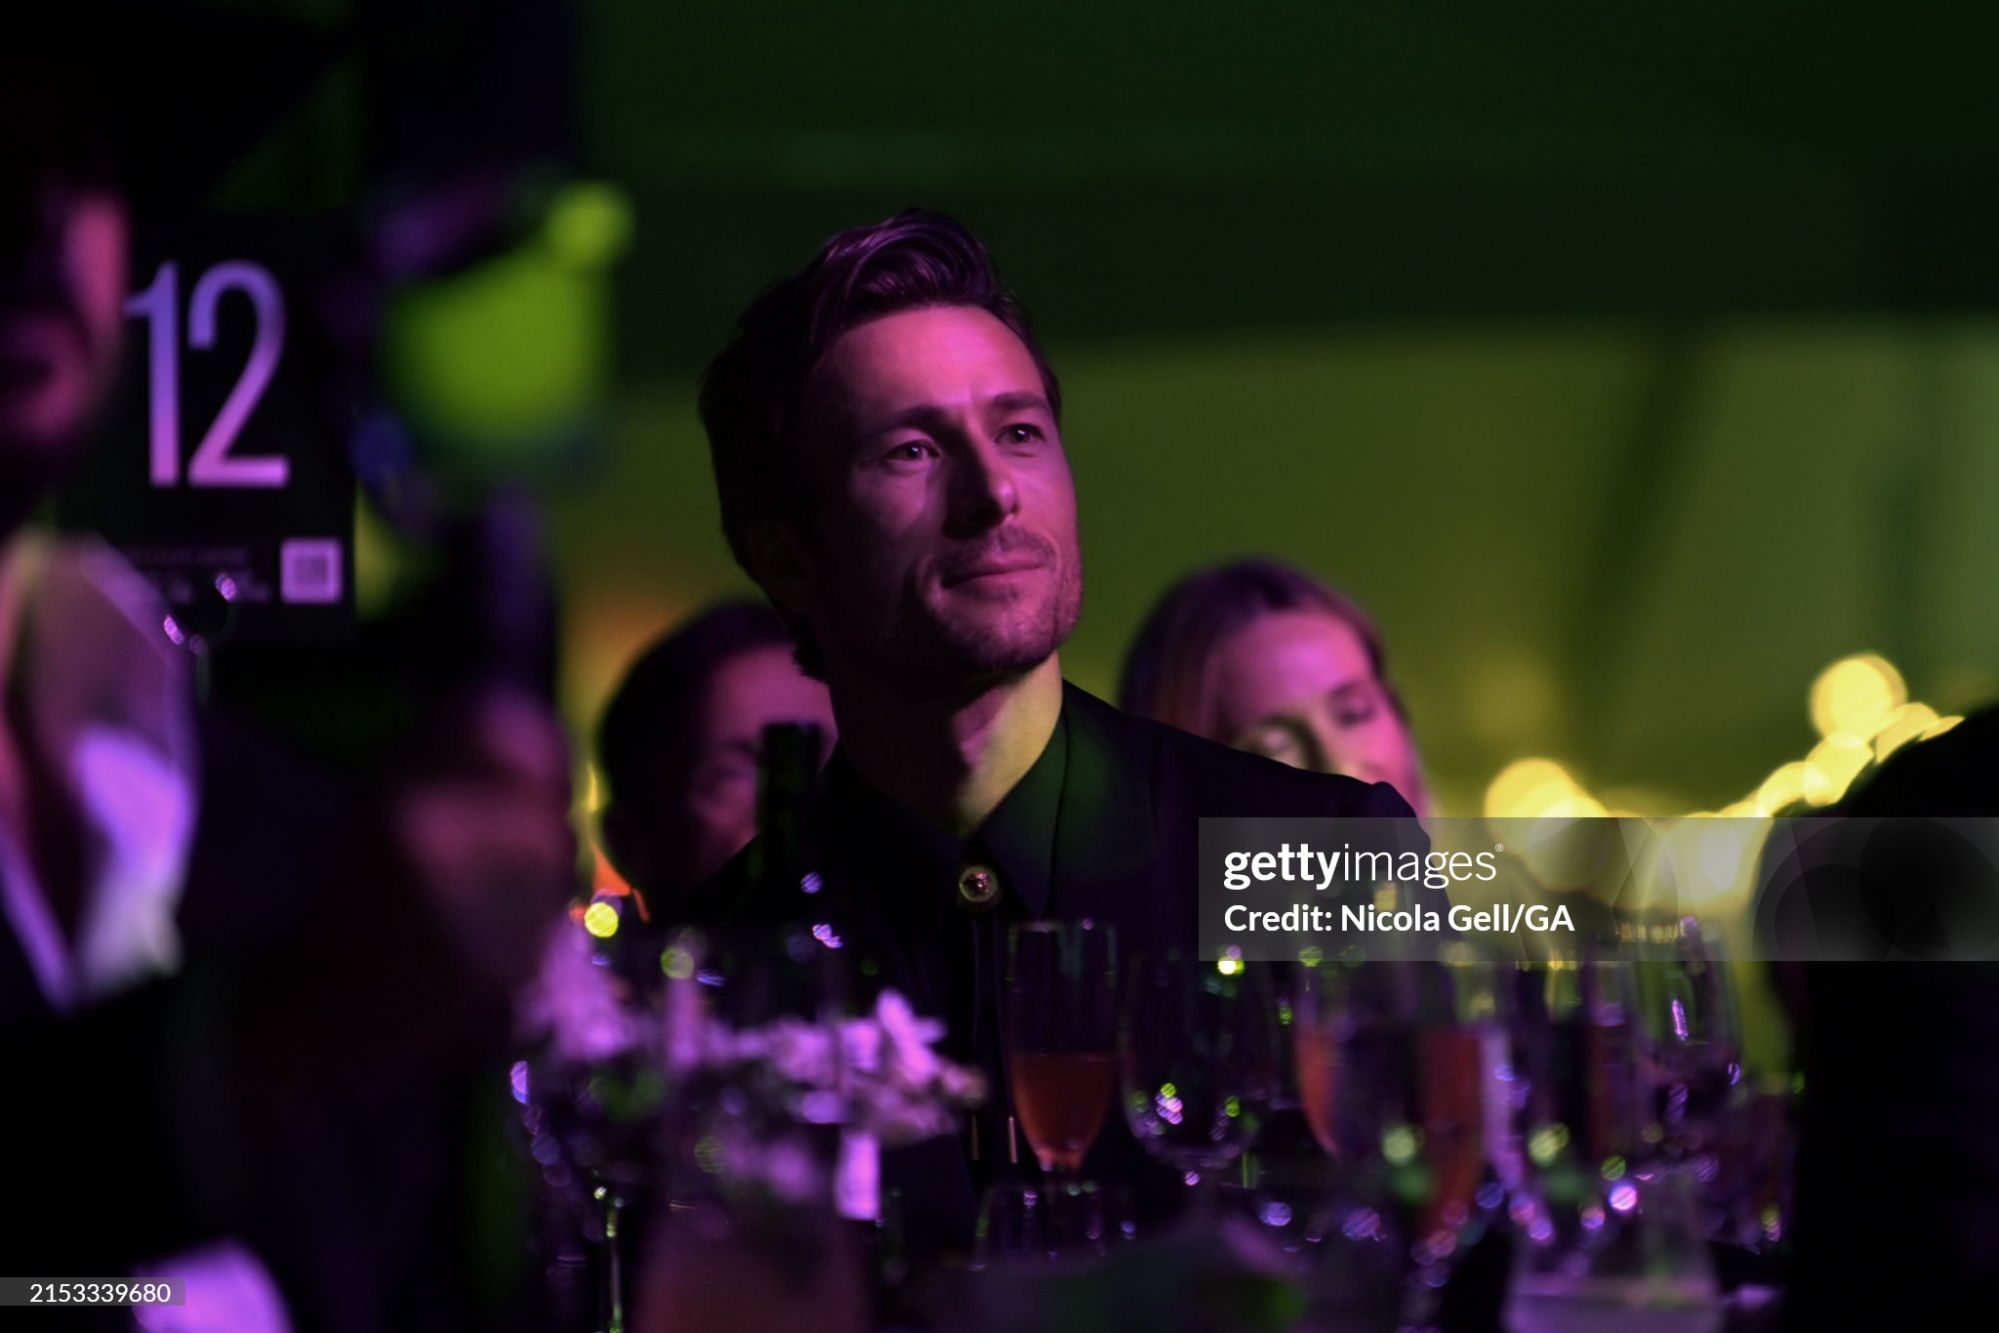 gettyimages-2153339680-2048x2048.jpg